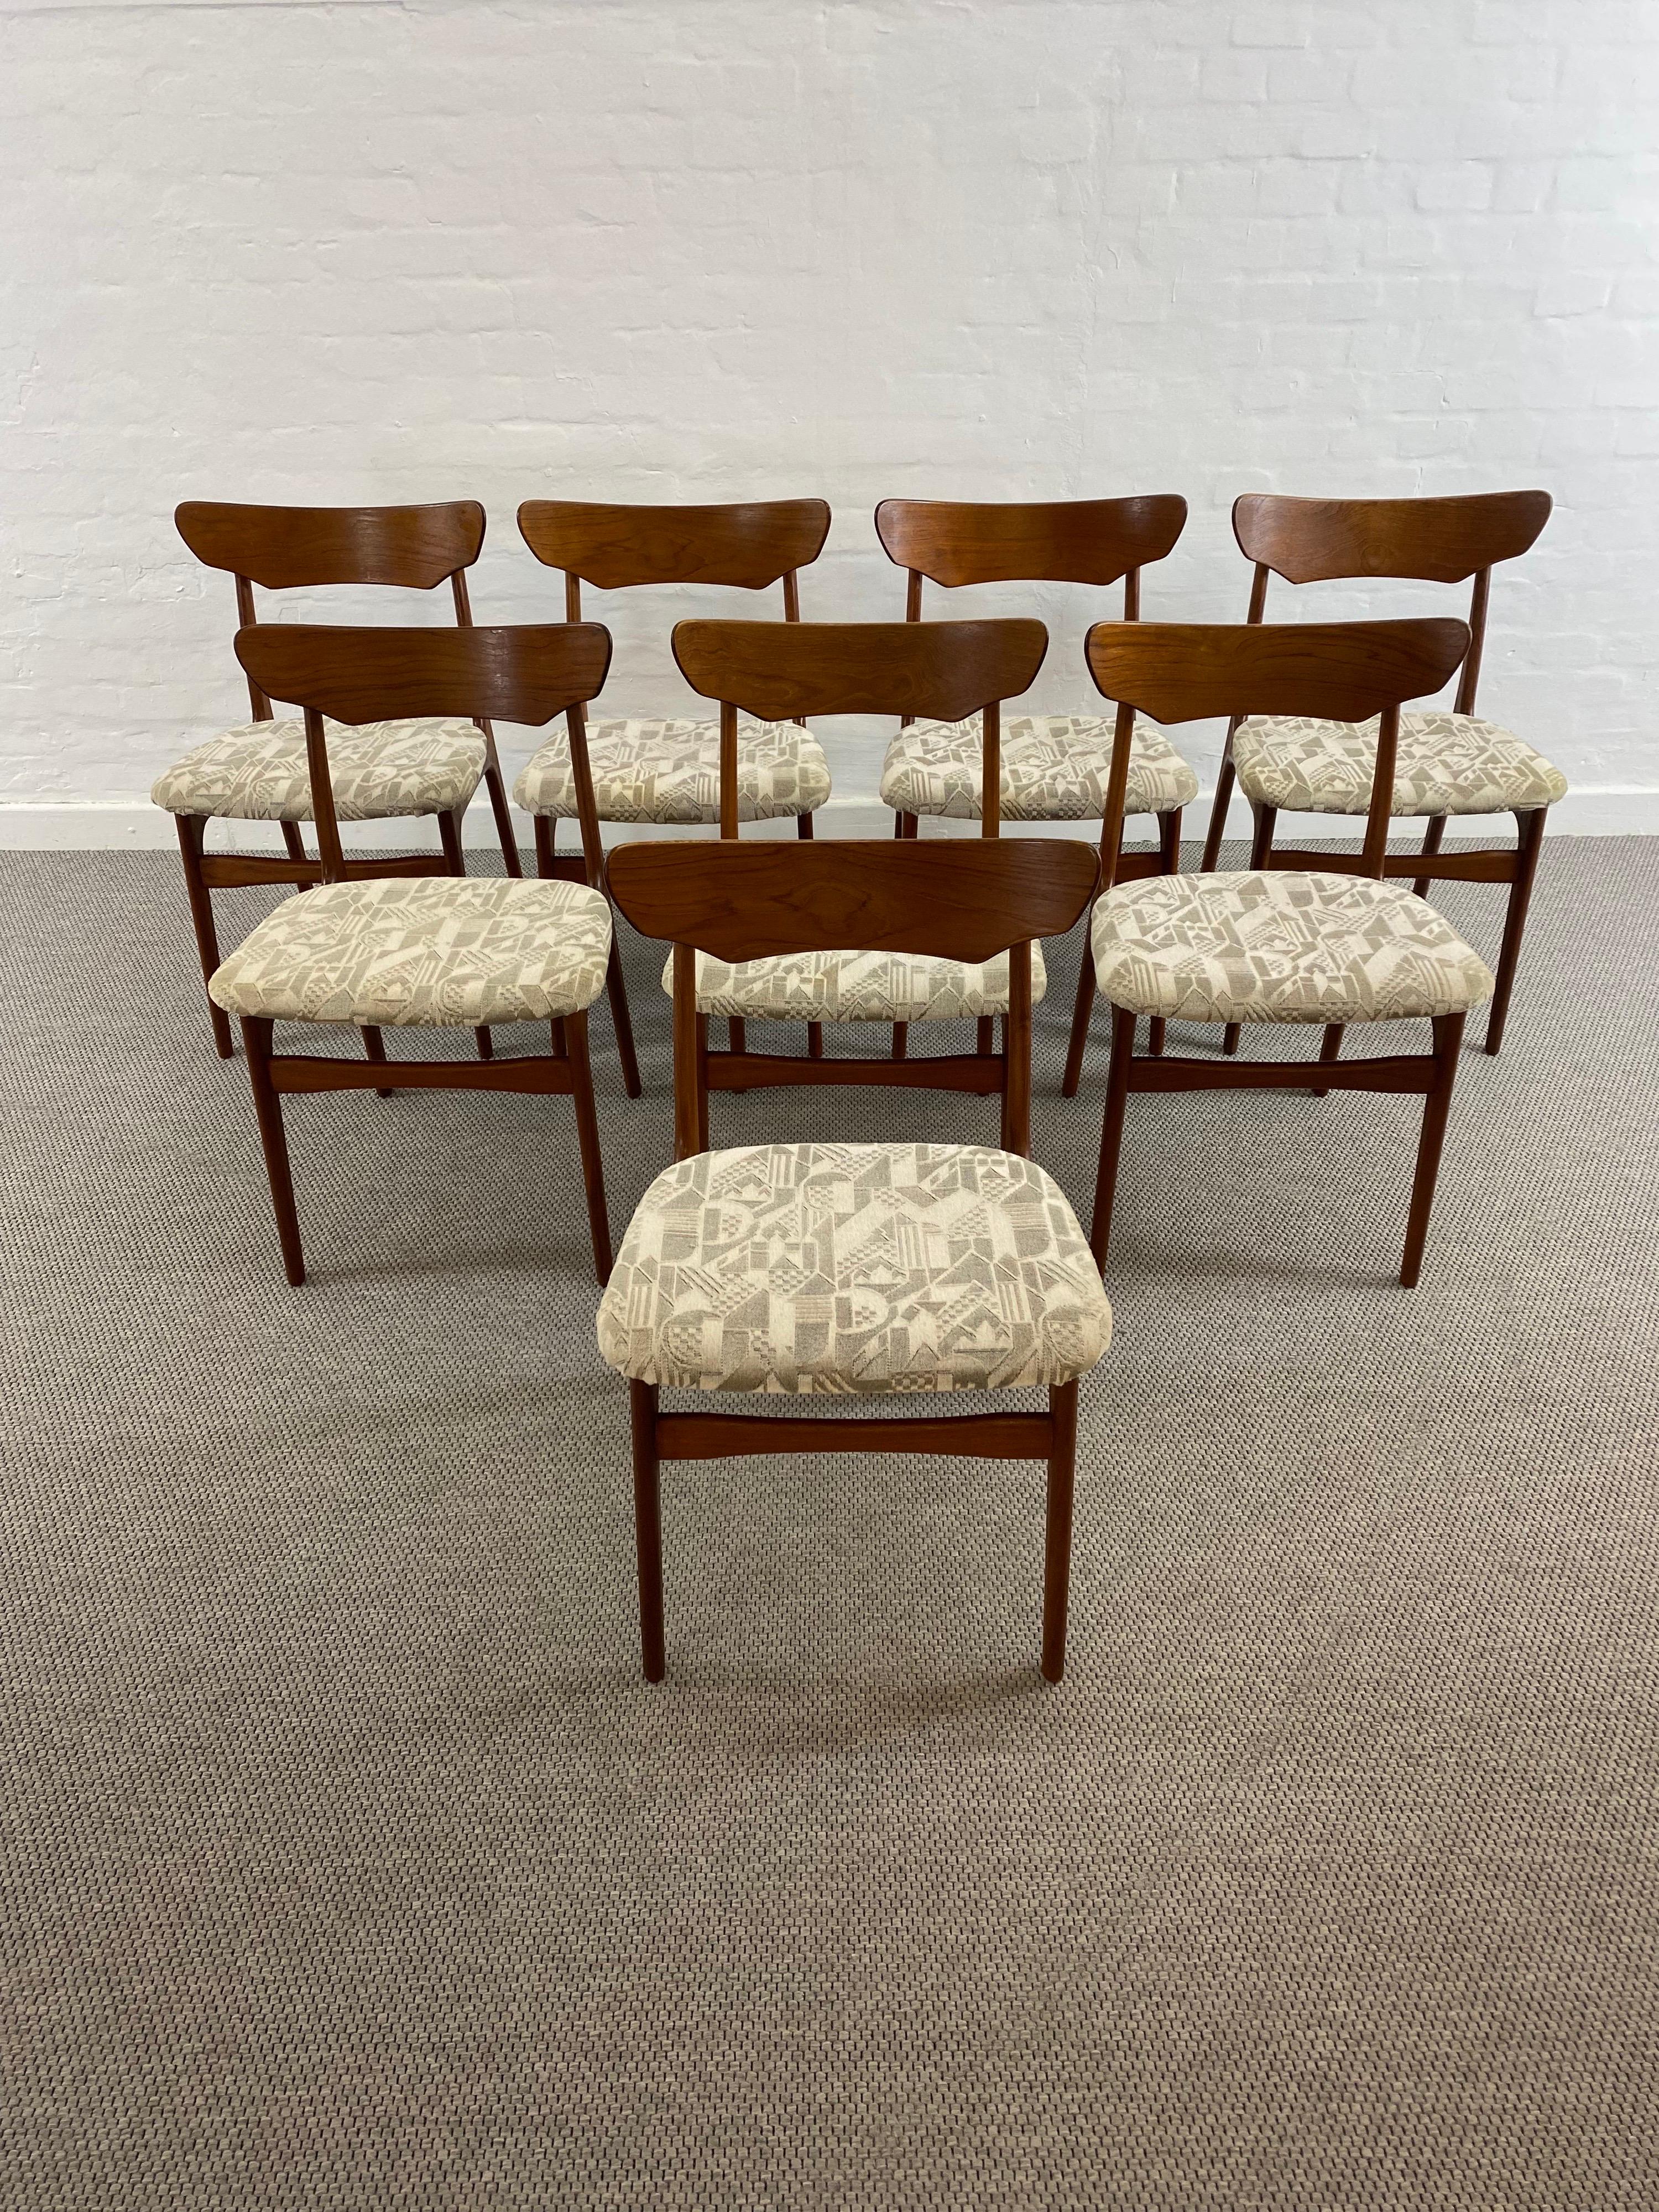 Set of 8 Midcentury Teak Dining Chairs from Schionning & Elgaard, Denmark, 1960s 8